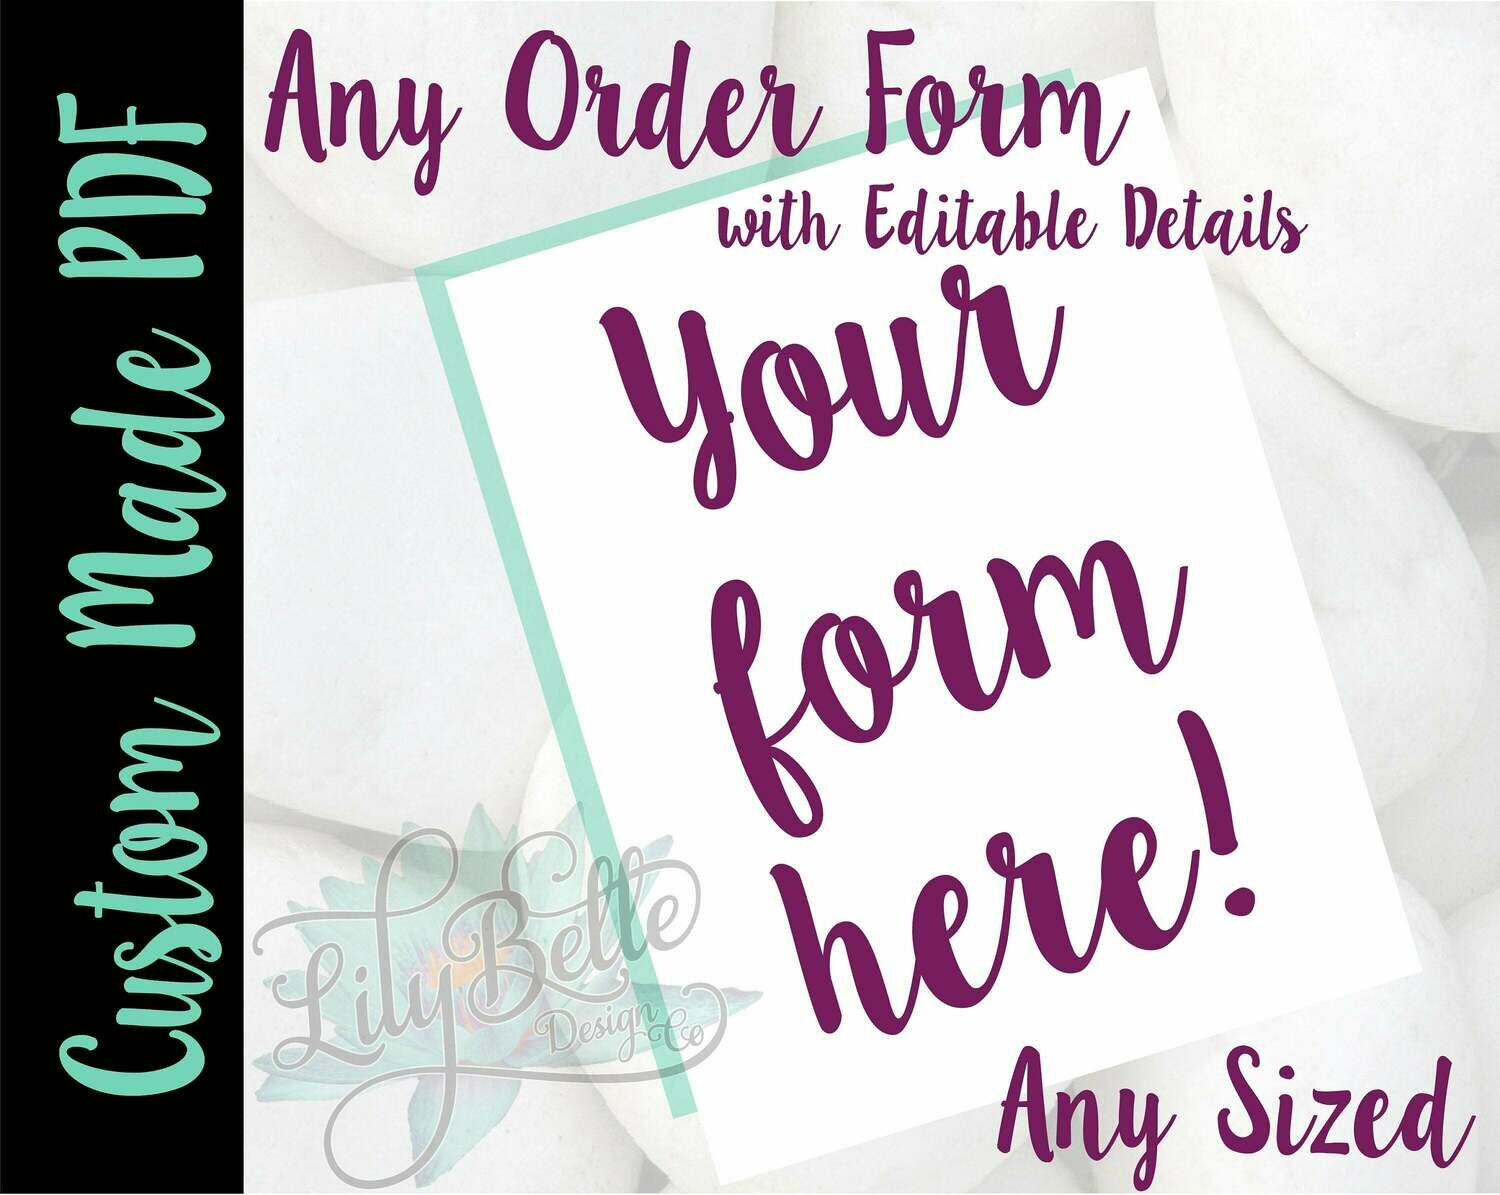 Custom Designed Order Form in PDF & JPG created for you with your Logo, Prcing, and editable detail information!